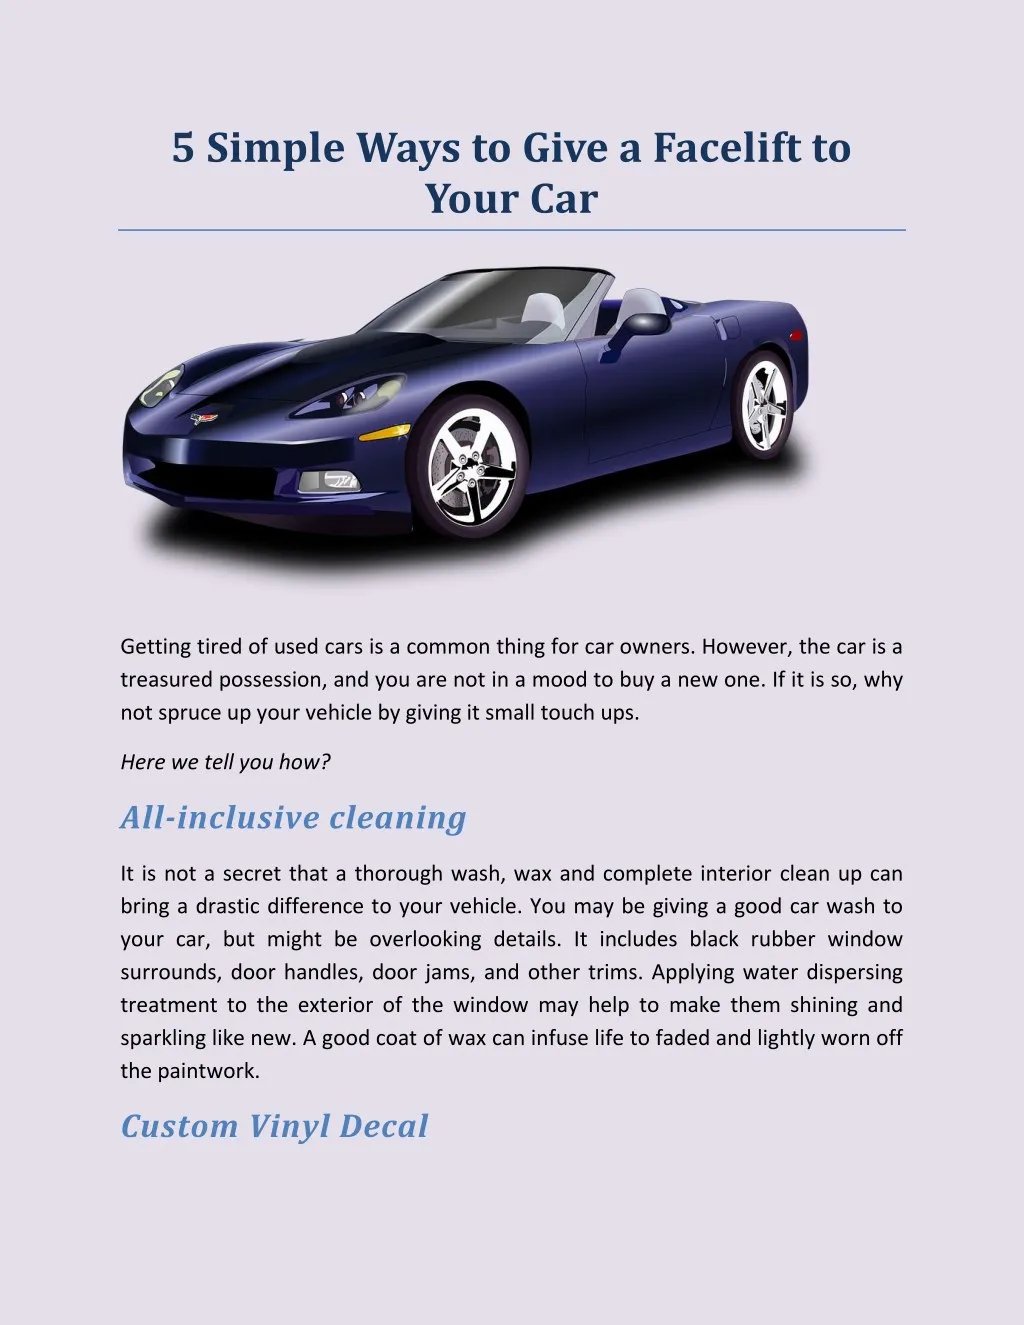 5 simple ways to give a facelift to your car